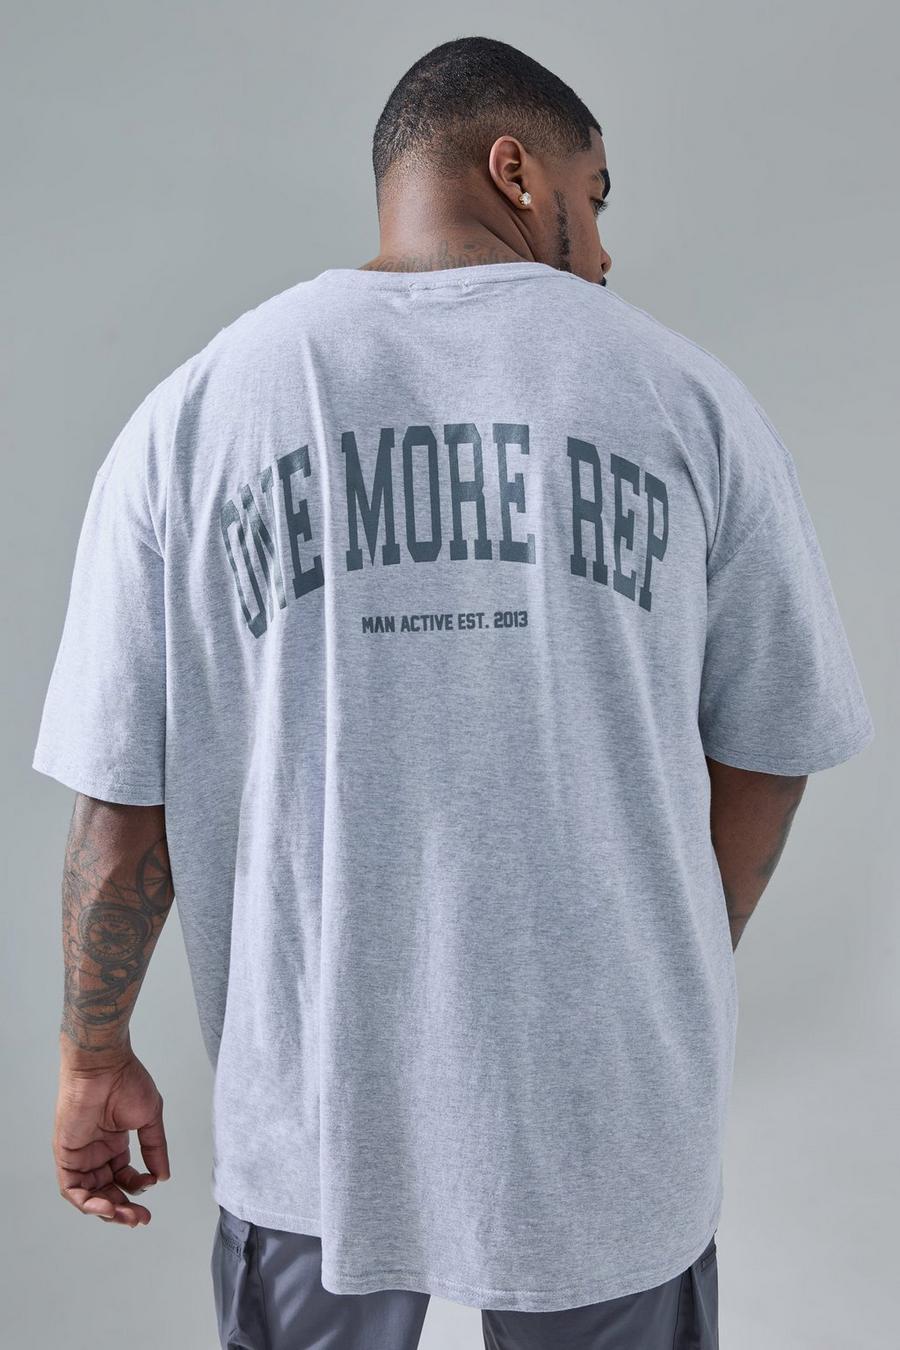 Grey marl Plus Oversized Man Active One More Rep T-Shirt image number 1